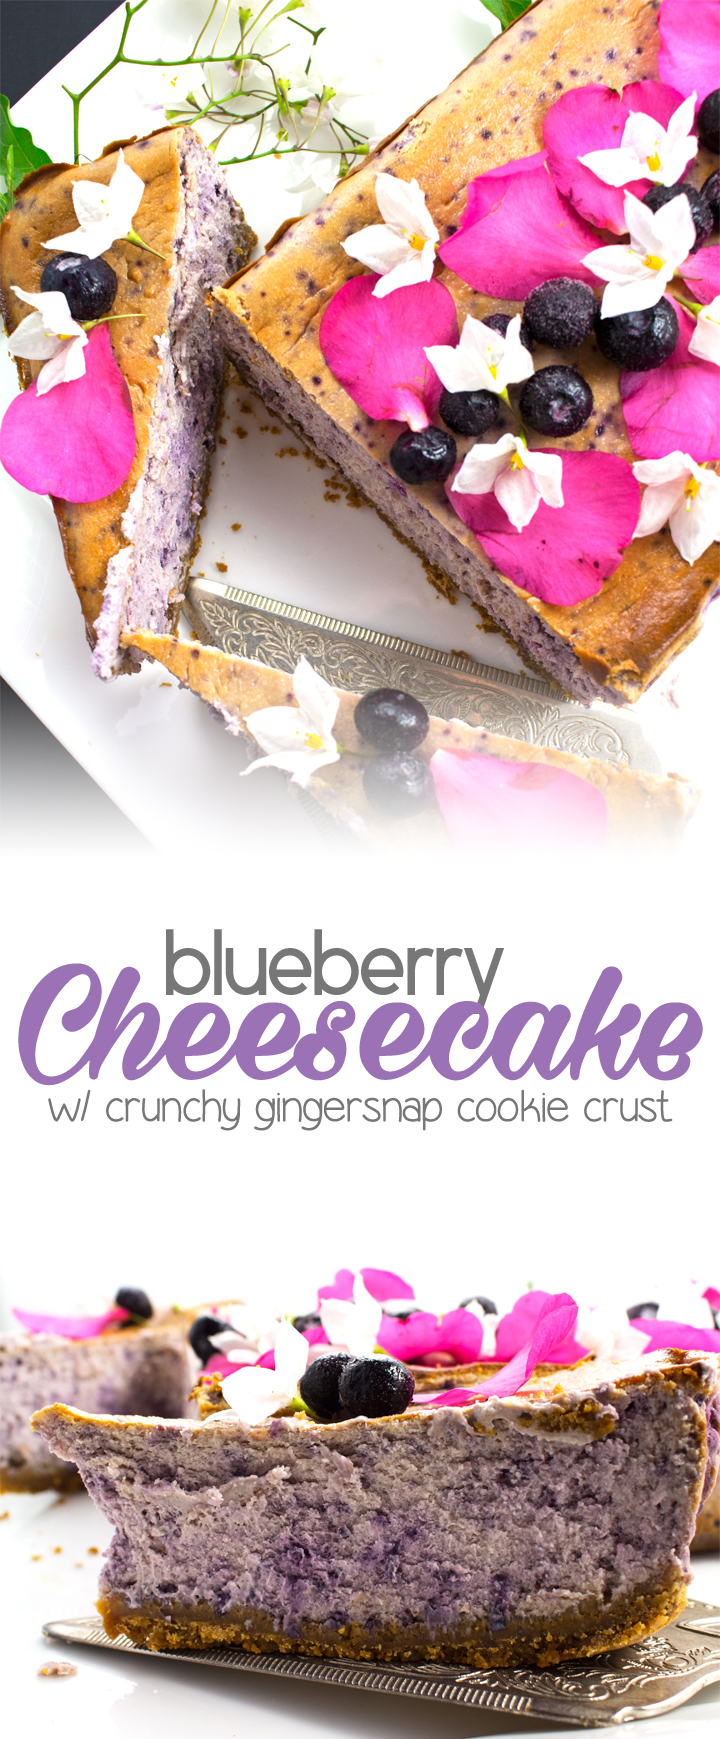 Blueberry Cheesecake Loaf - Extremely smooth & creamy with gingersnap cookie crust! Delicious & vegetarian!!